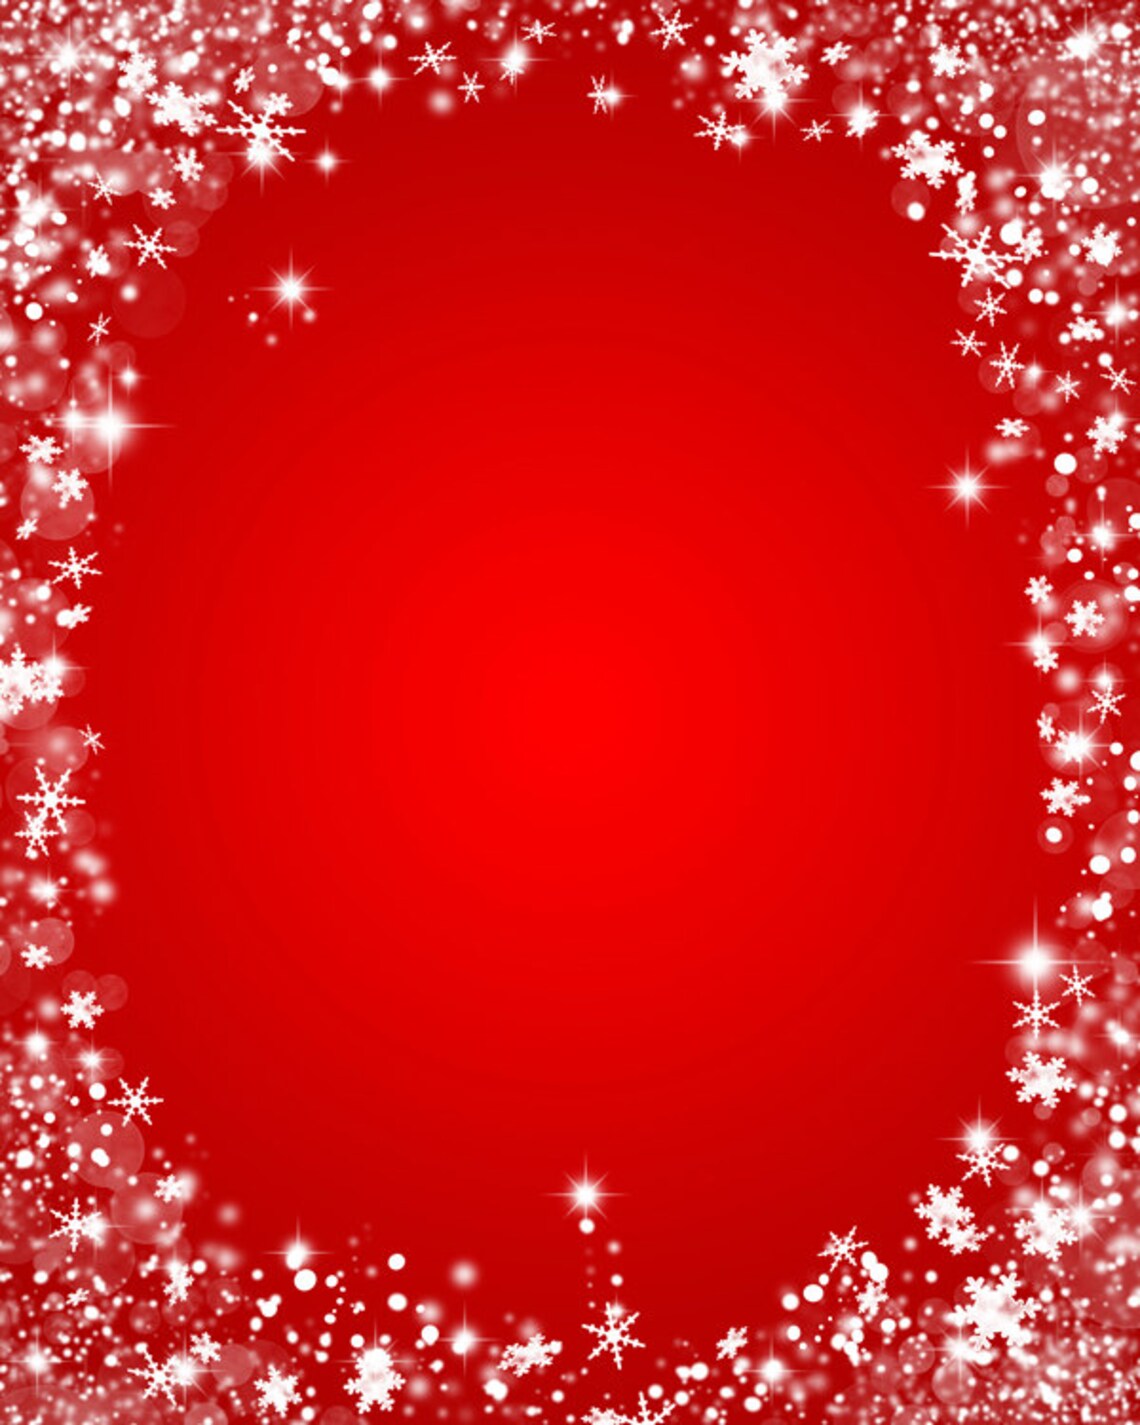 Snowflake and Sparkle Background Christmas Overlay Digital - Etsy